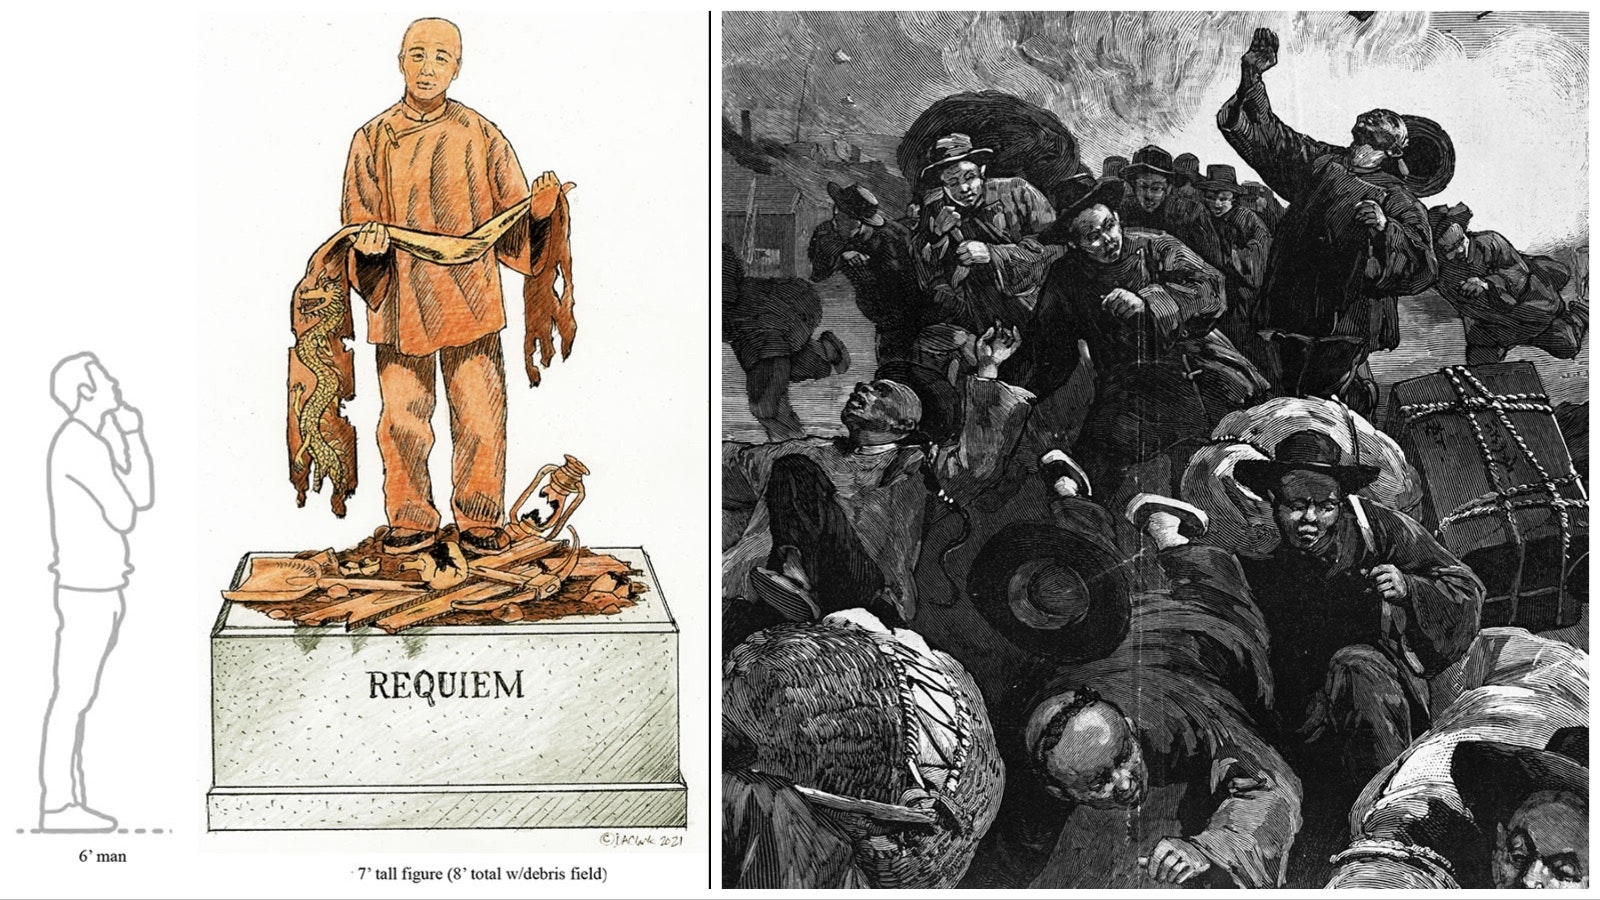 An illustration of the sculpture "Requiem" Lander artist David Alan Clark is creating for Rock Springs to memorialize the Chinese Massacre of 1885. The event made national news at the time, including this illustration that was published in Harper's Weekly on Sept. 26, 1885.